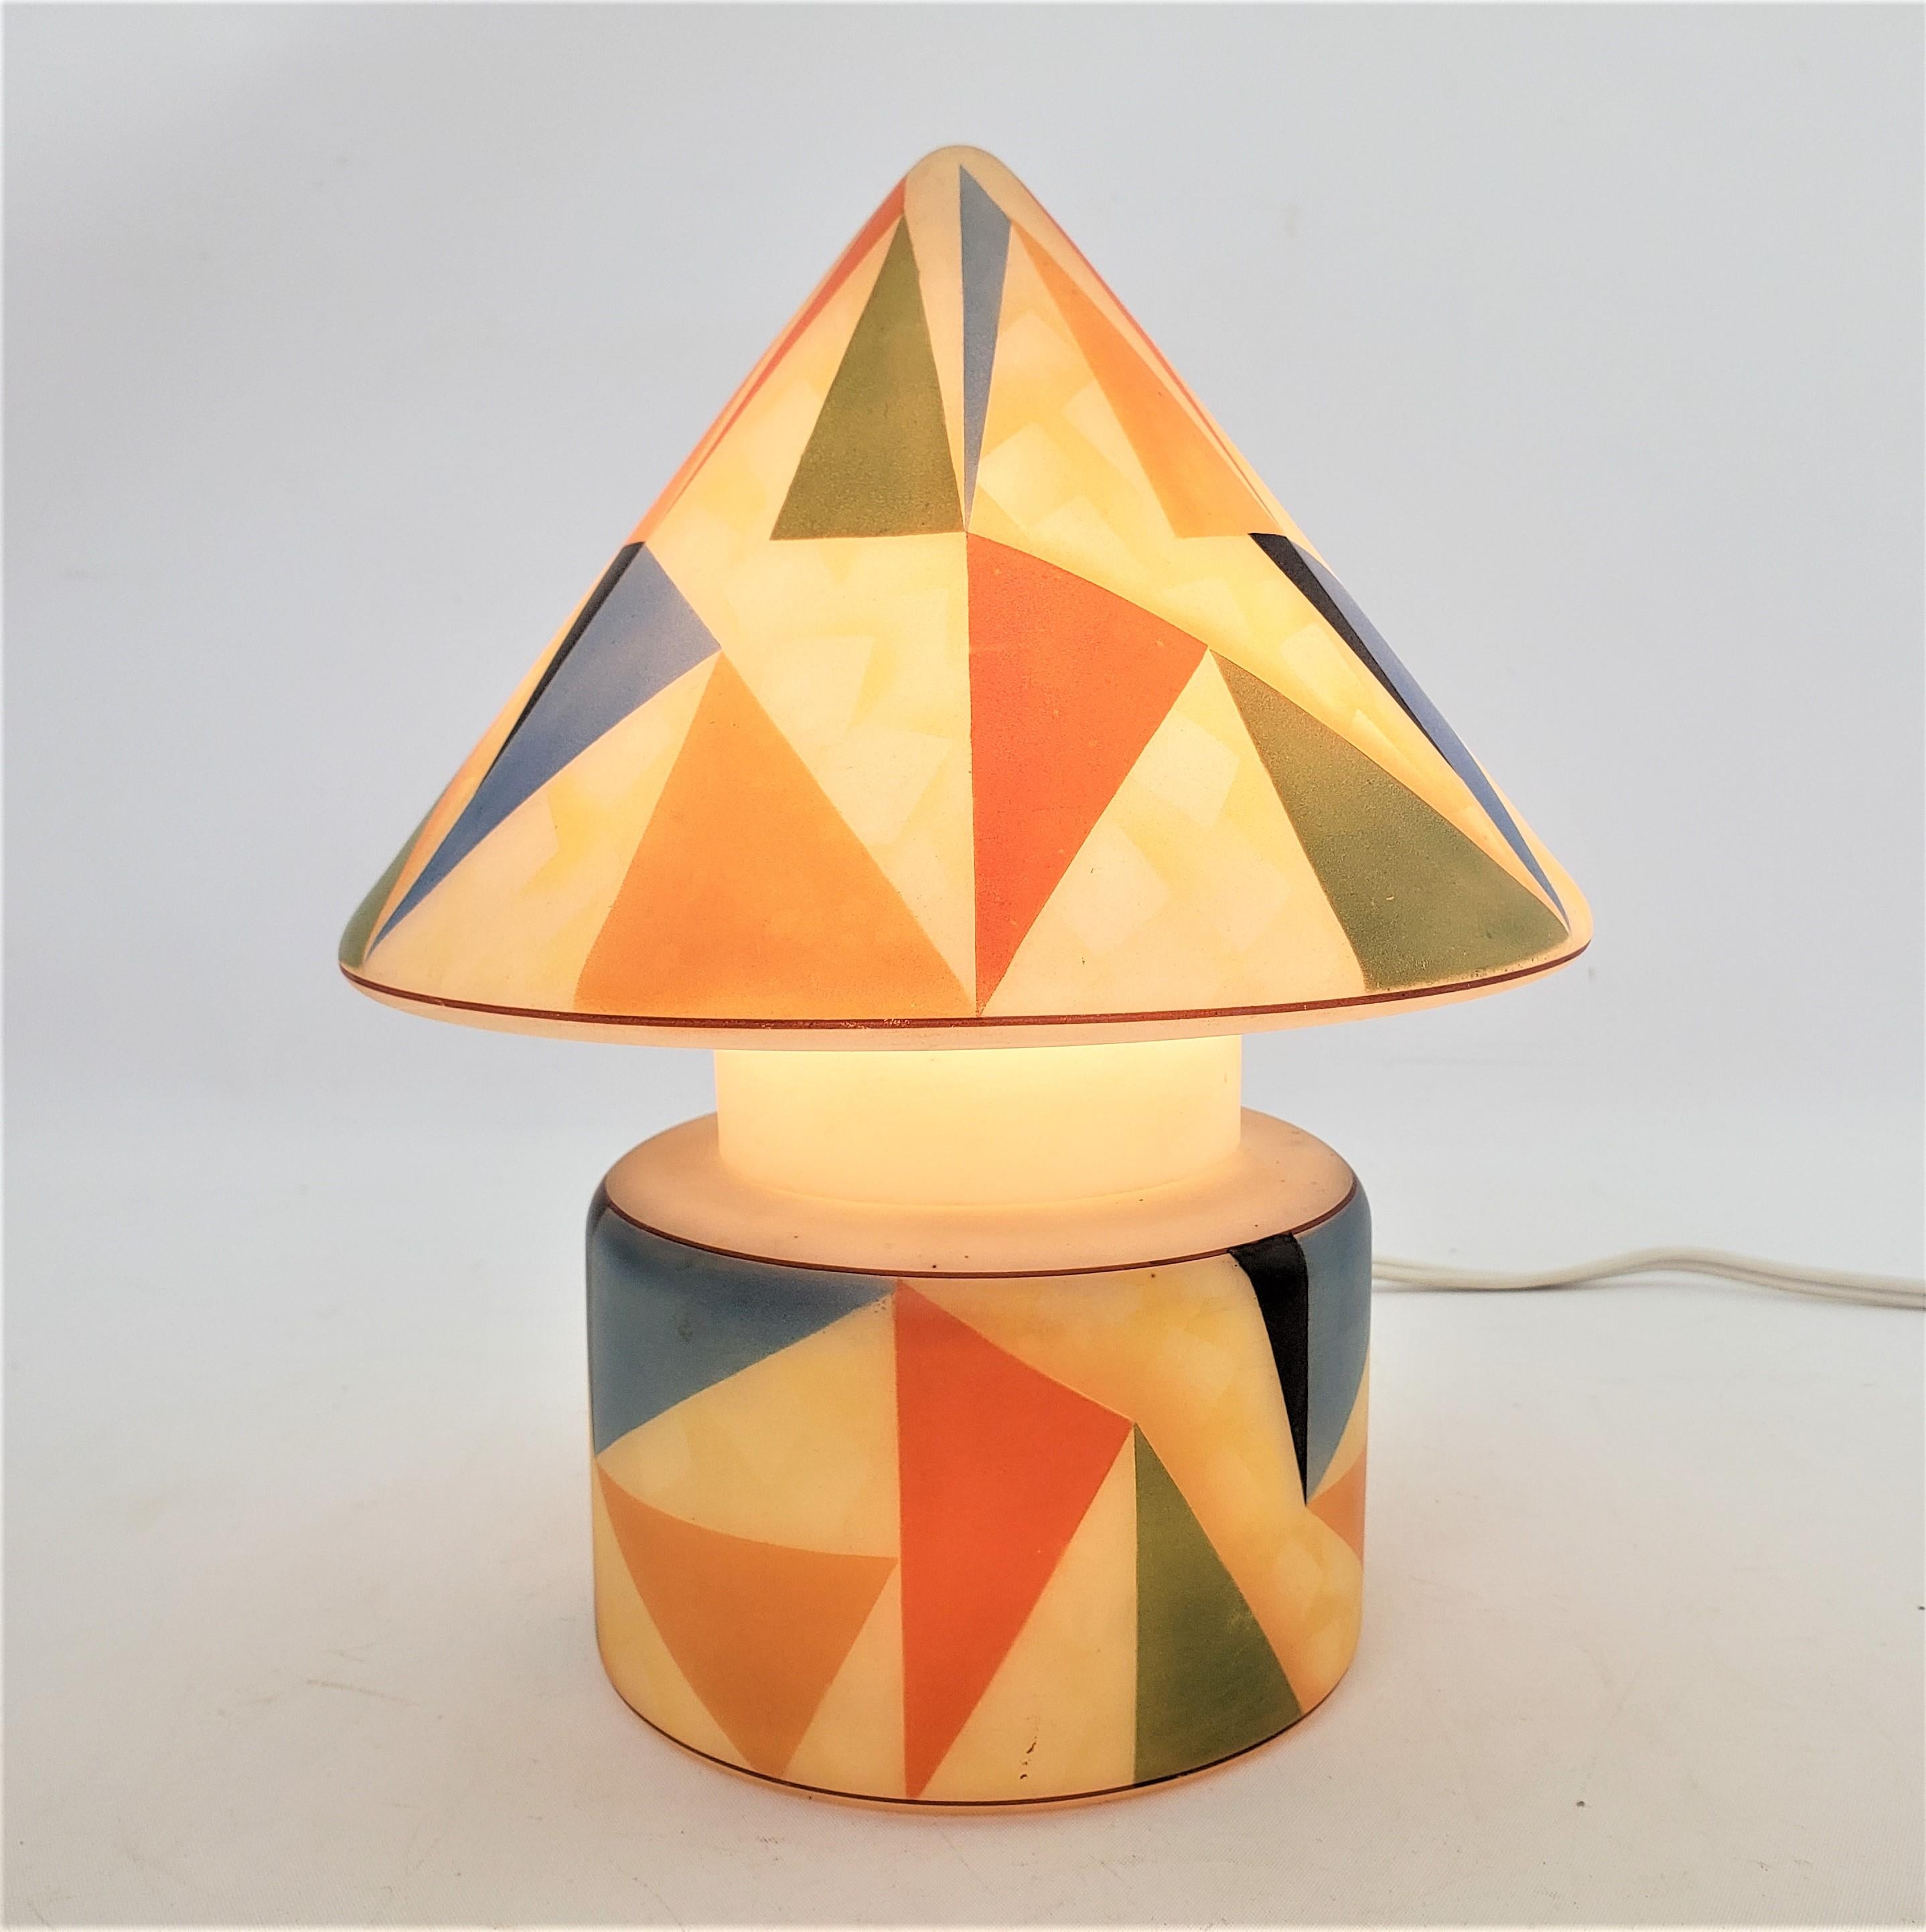 This glass accent or table lamp is unsigned, but presumed to have originated from the Czech Republic and date to approximately 1960 and done in the period Mid-Century Modern style. The lamp is done with a conical shaped shade and a squat cylindrical